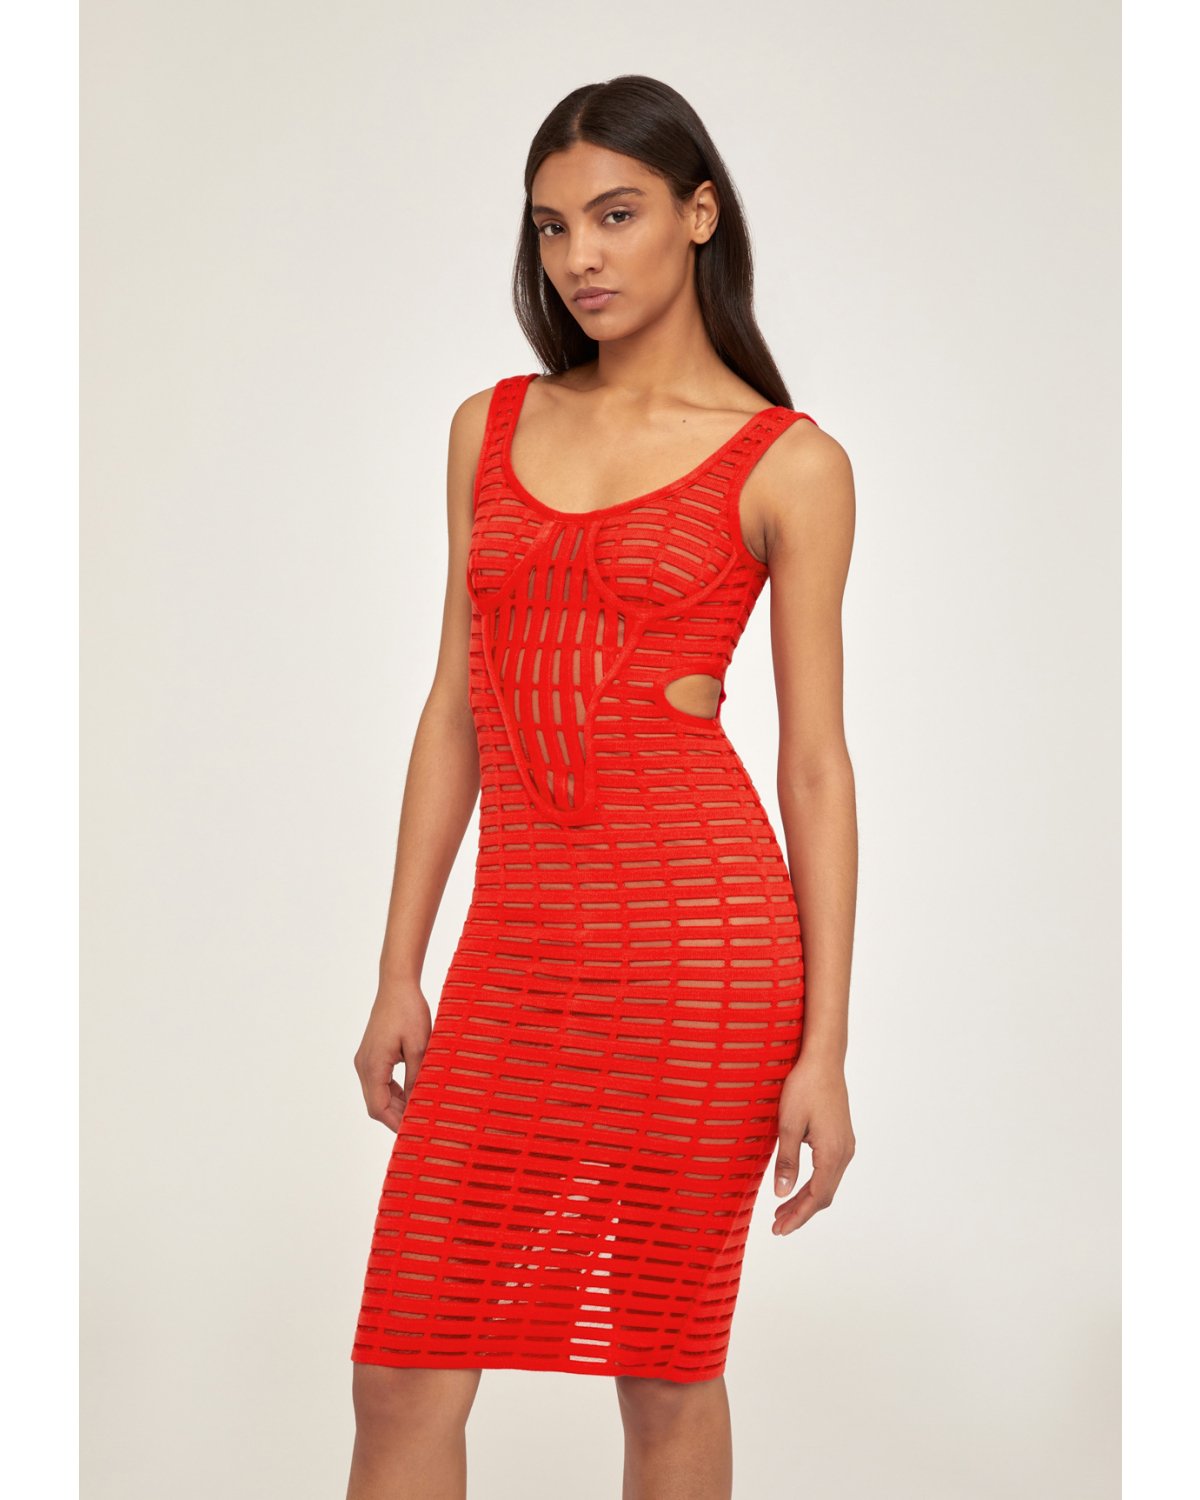 Red iconic dress with cut out | Iconic Capsule Collection, 73_74 | Genny